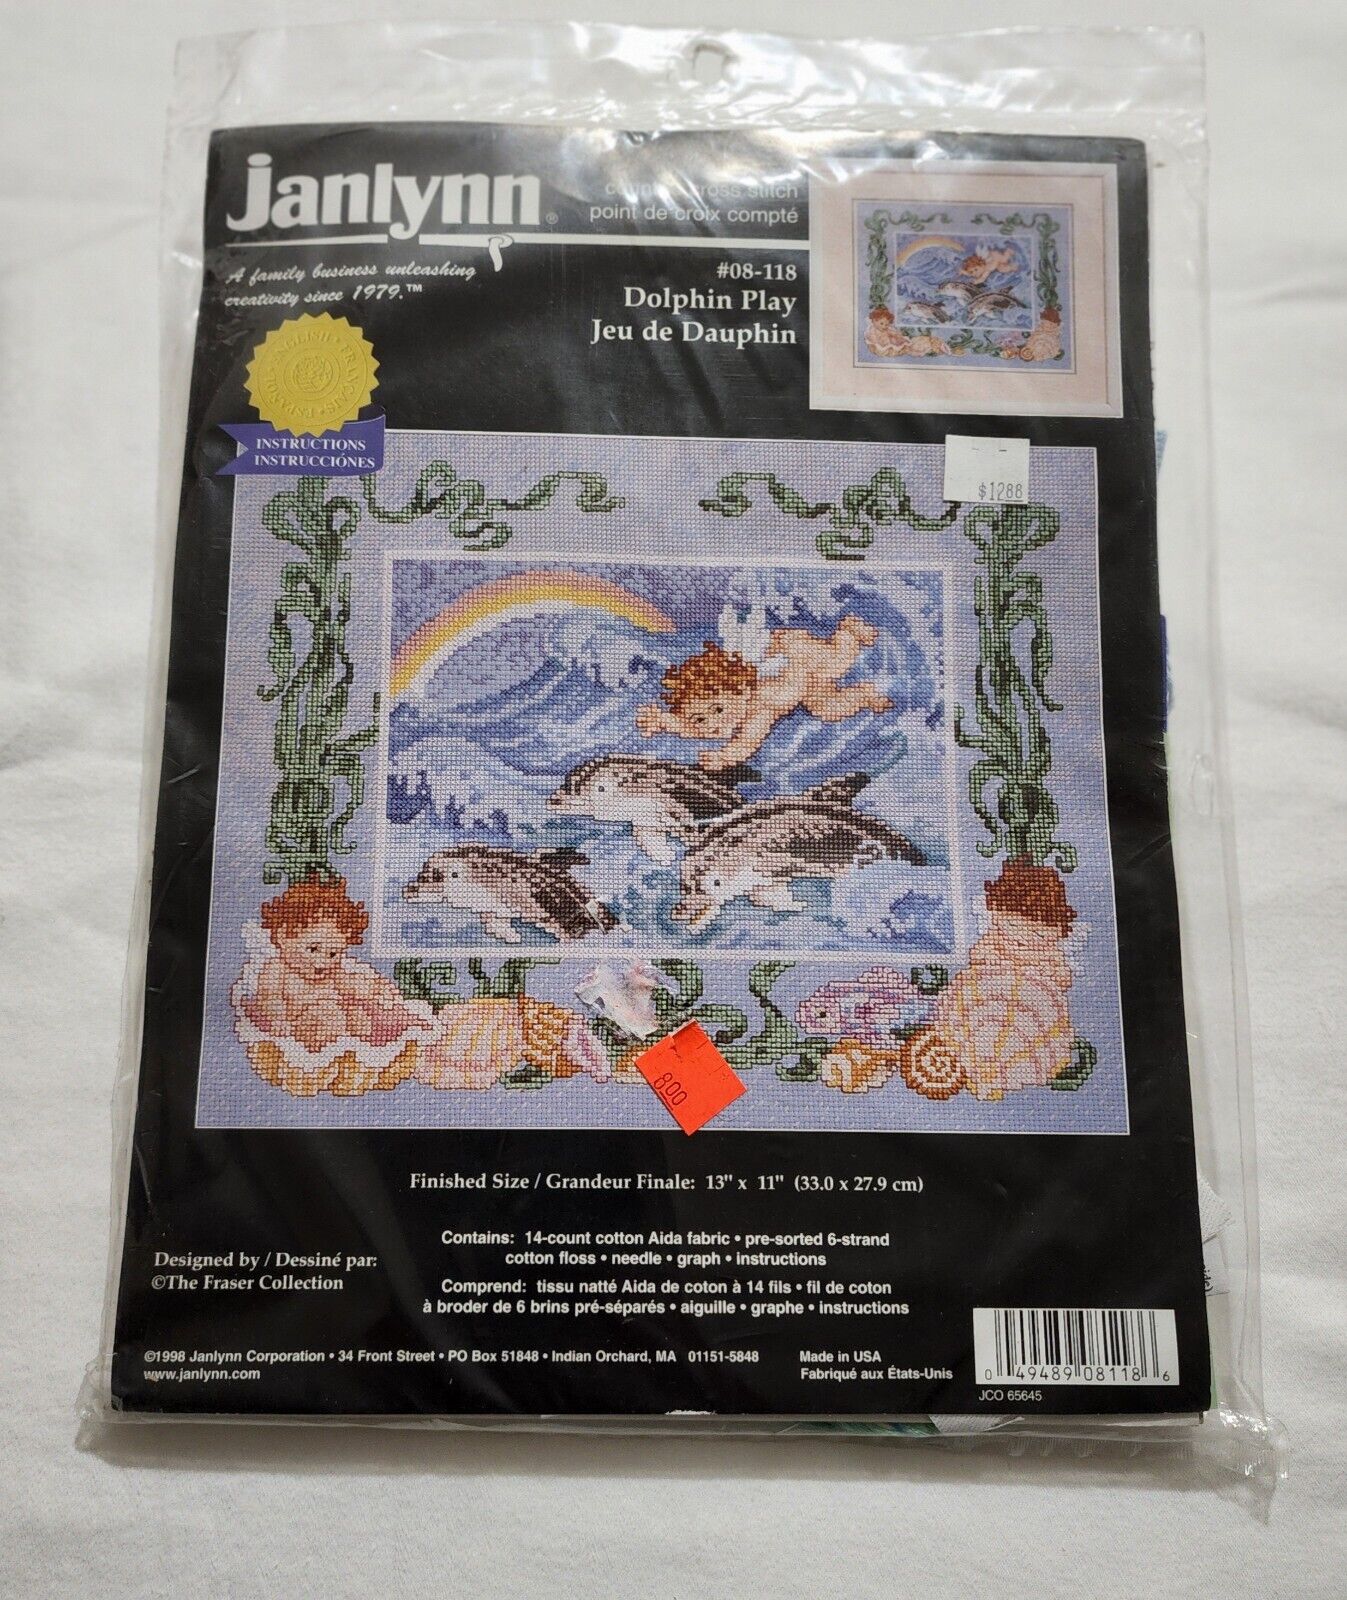 Vintage 1998 Janlynn DOLPHIN PLAY Counted Cross Stitch Kit - #08-118